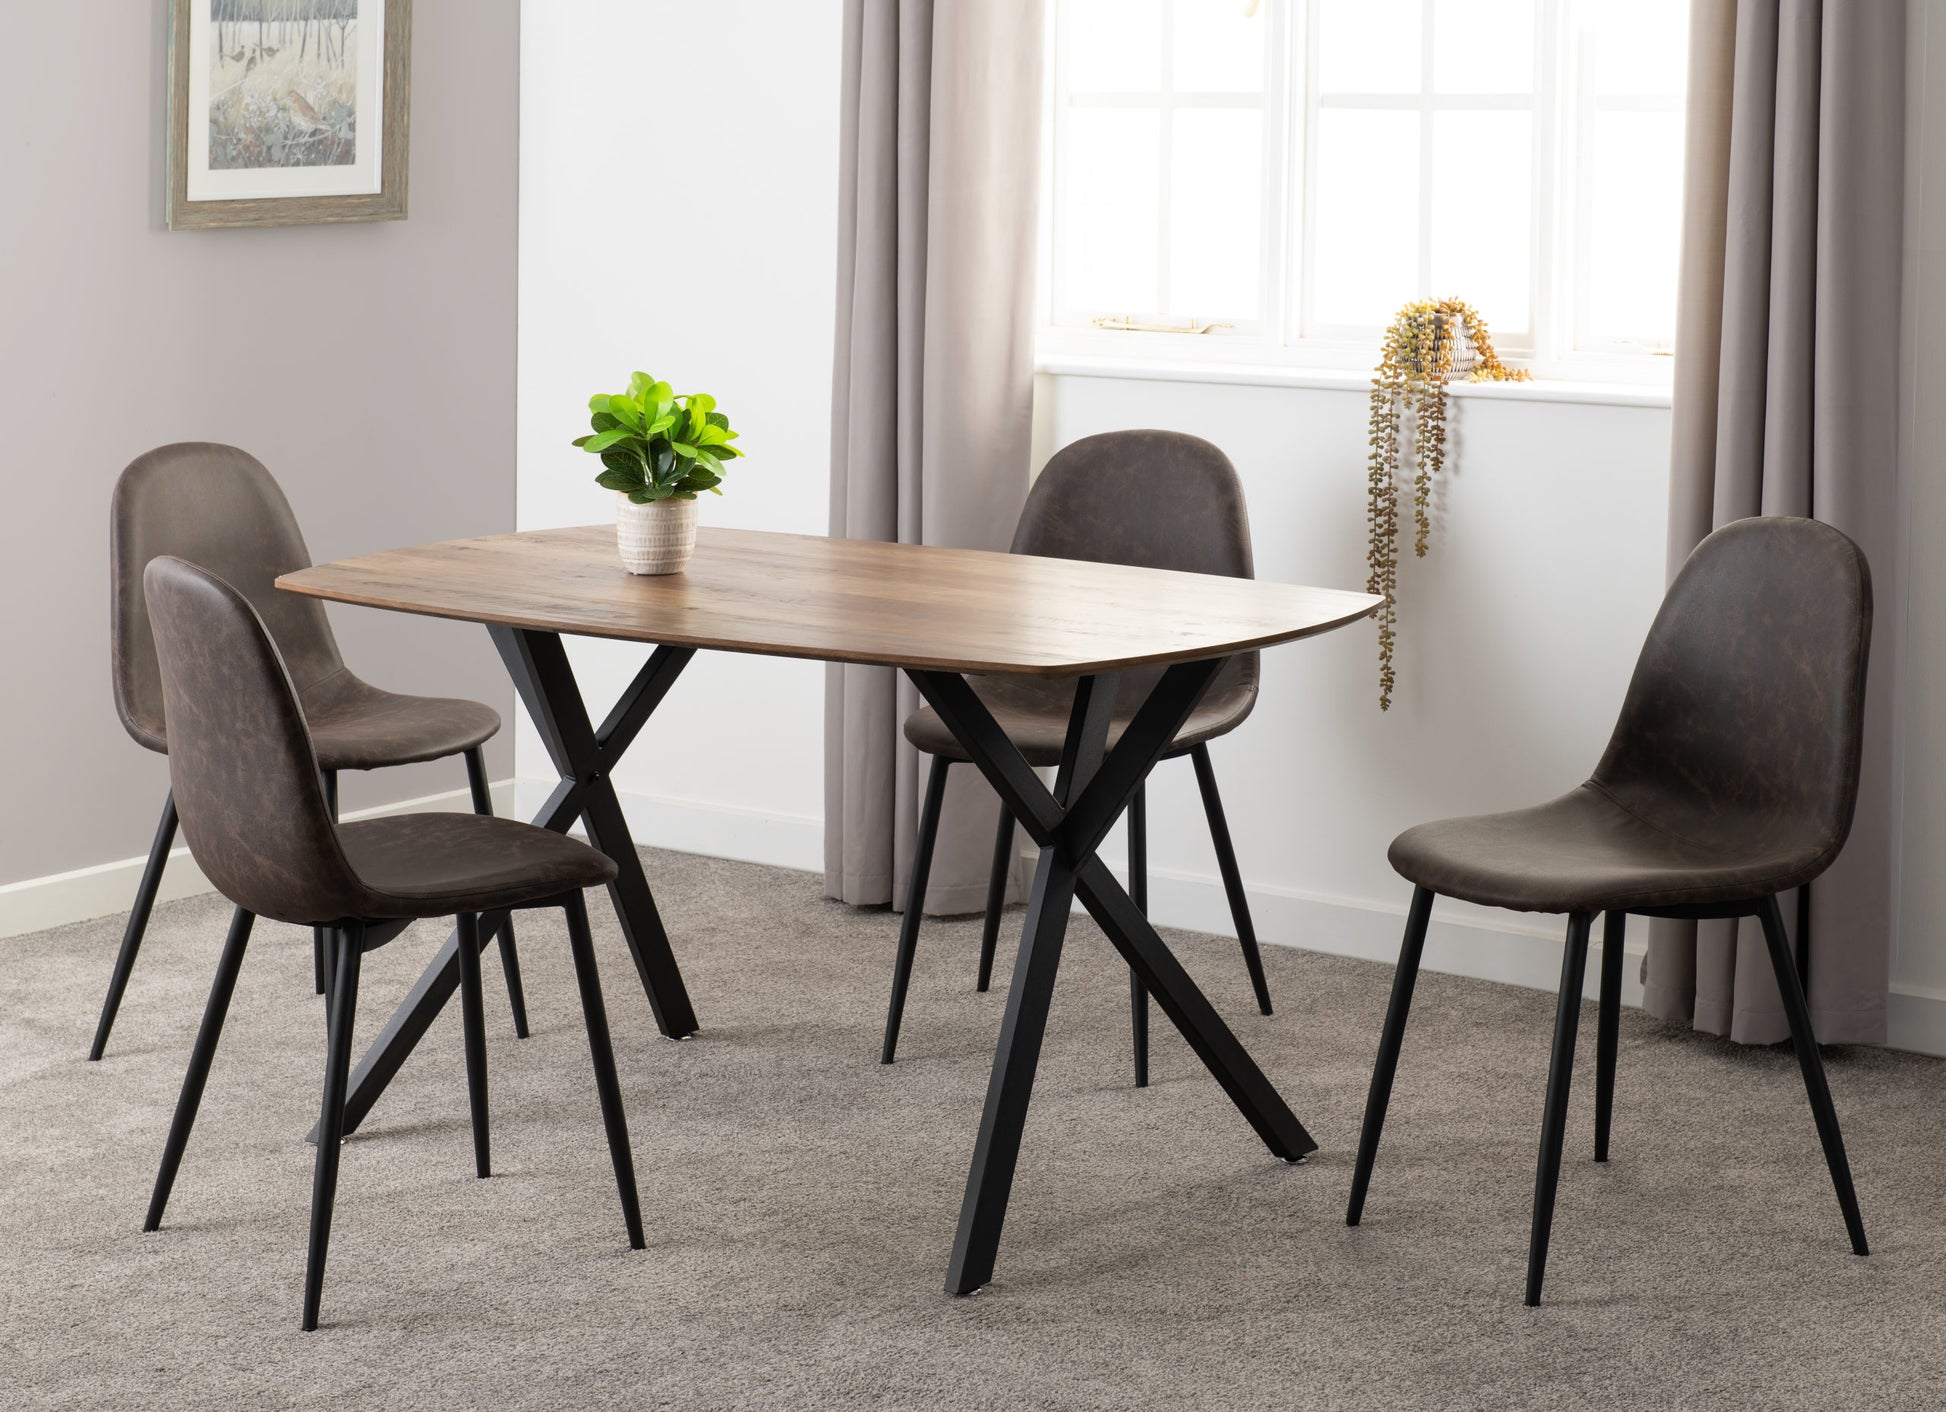 Athens Rectangular Dining Set Medium Oak Effect/Black/Brown Faux Leather- The Right Buy Store